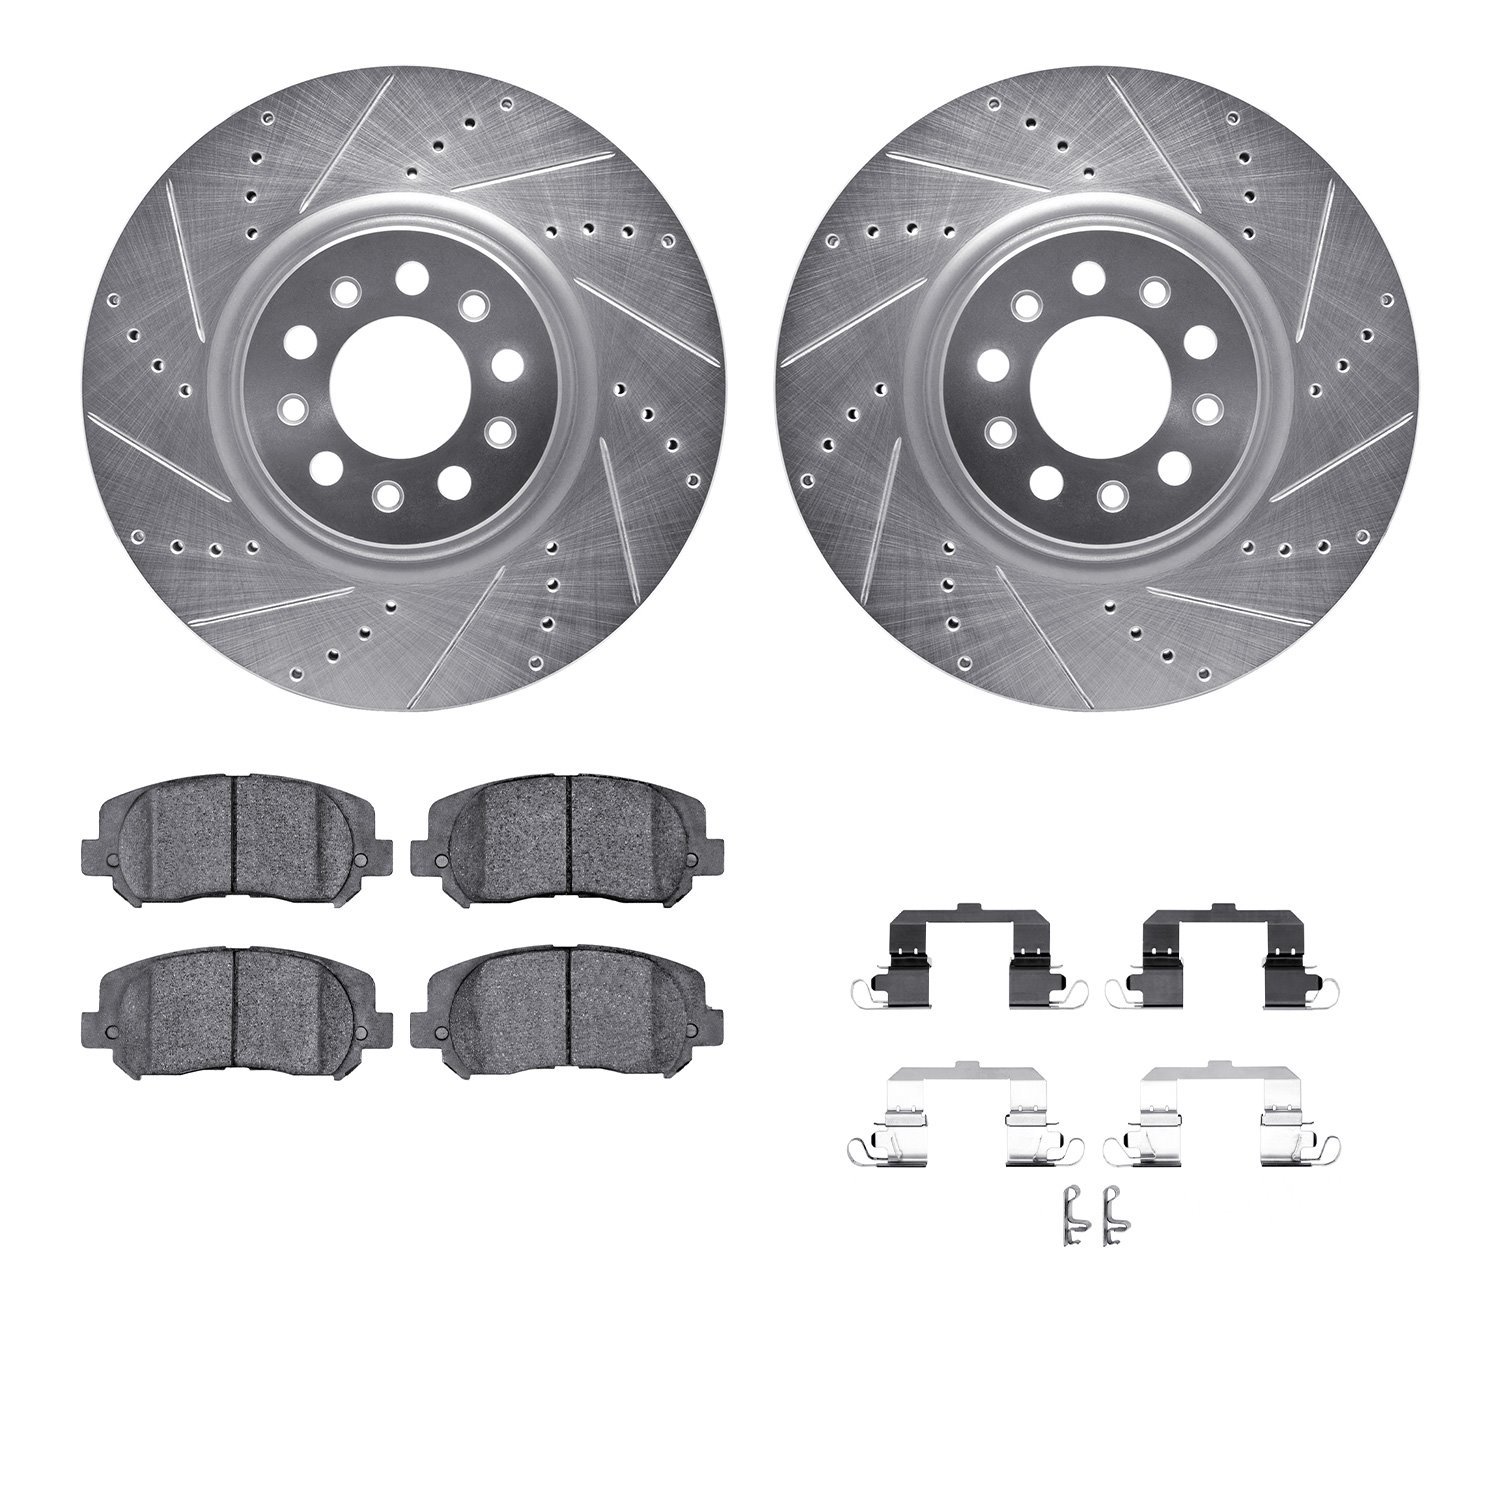 7412-42015 Drilled/Slotted Brake Rotors with Ultimate-Duty Brake Pads Kit & Hardware [Silver], Fits Select Mopar, Position: Fron